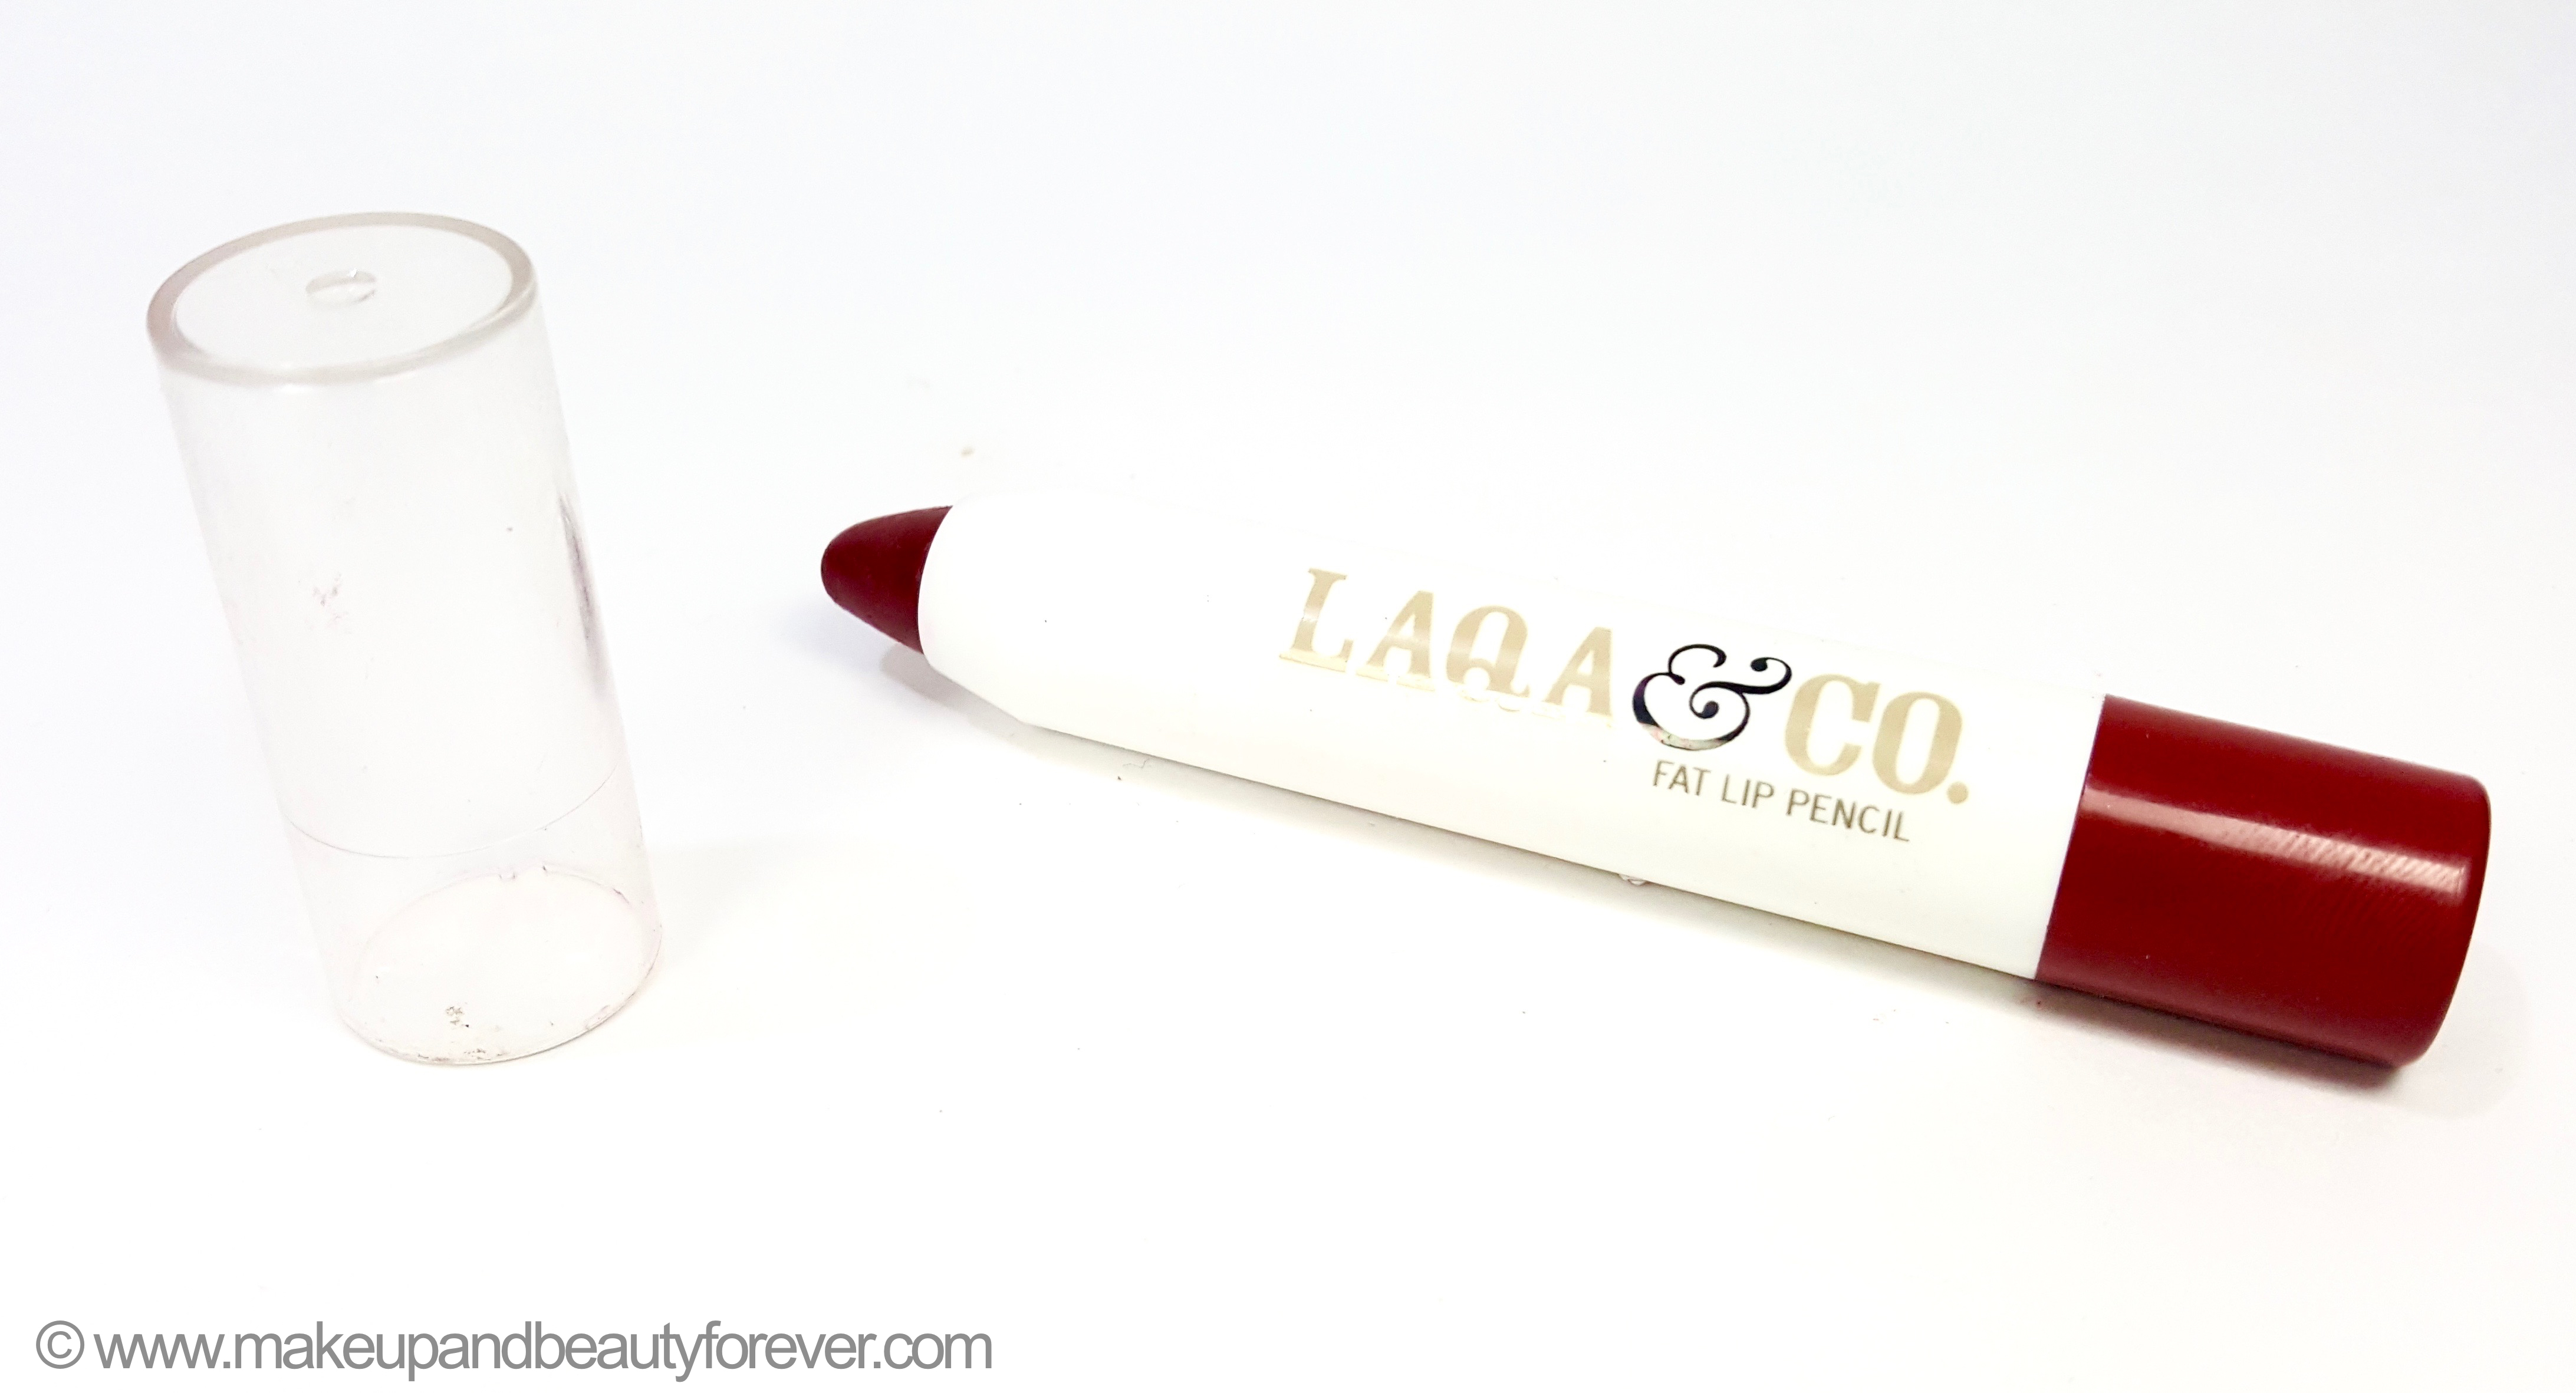 LAQA Co Fat Lip Pencil Palate Cleanser Review Swatches Indian Makeup Beauty Blog